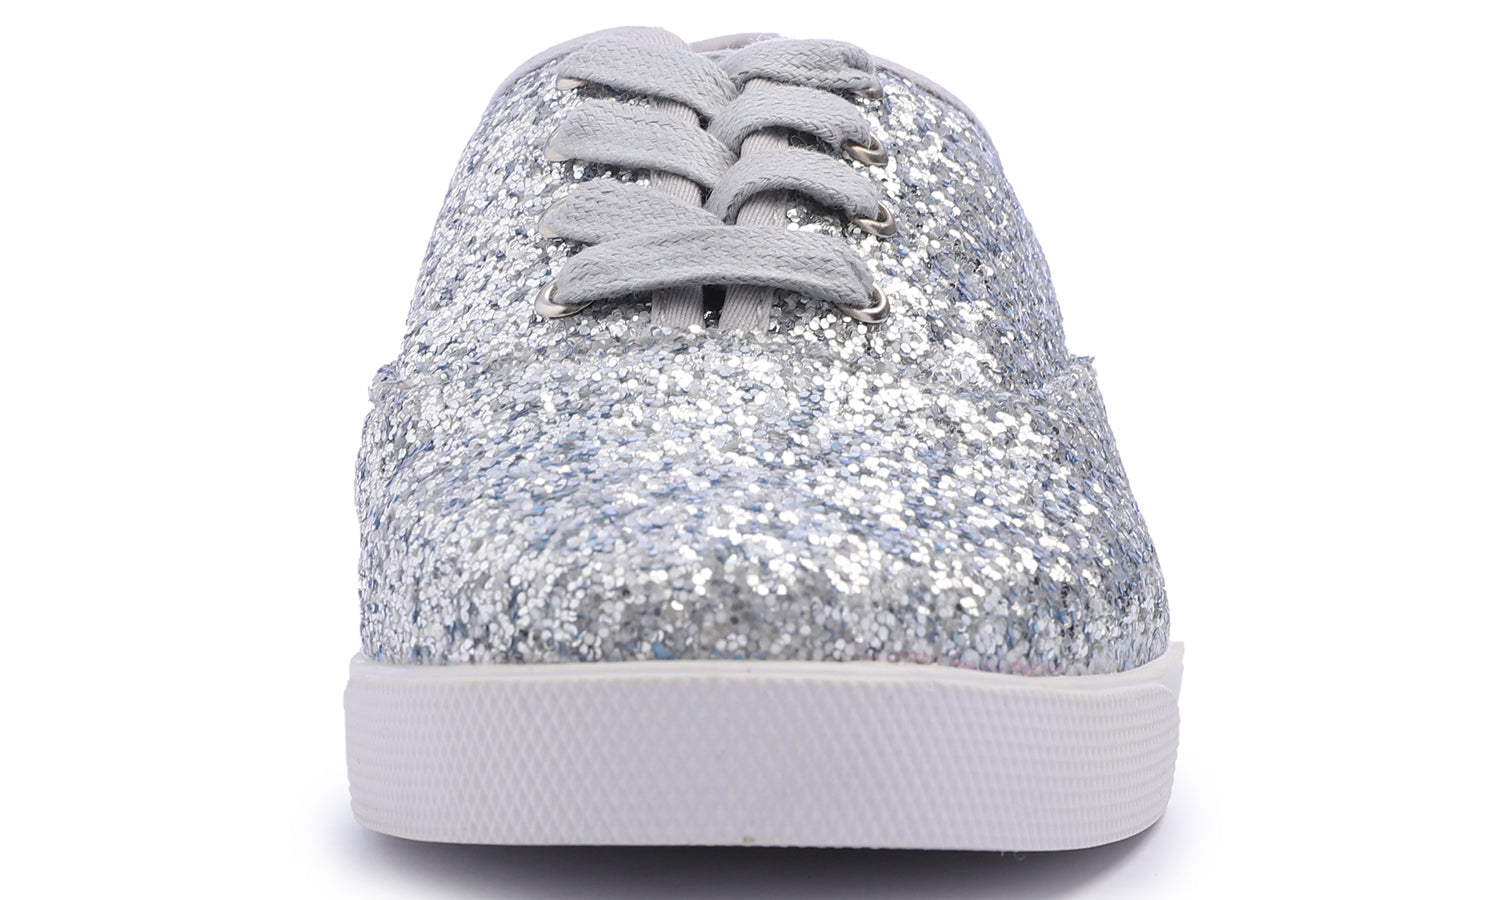 Feversole Women's Fashion Dress Sneakers Party Bling Casual Flats Embellished Shoes Silver Plimsolls Glitter Lace